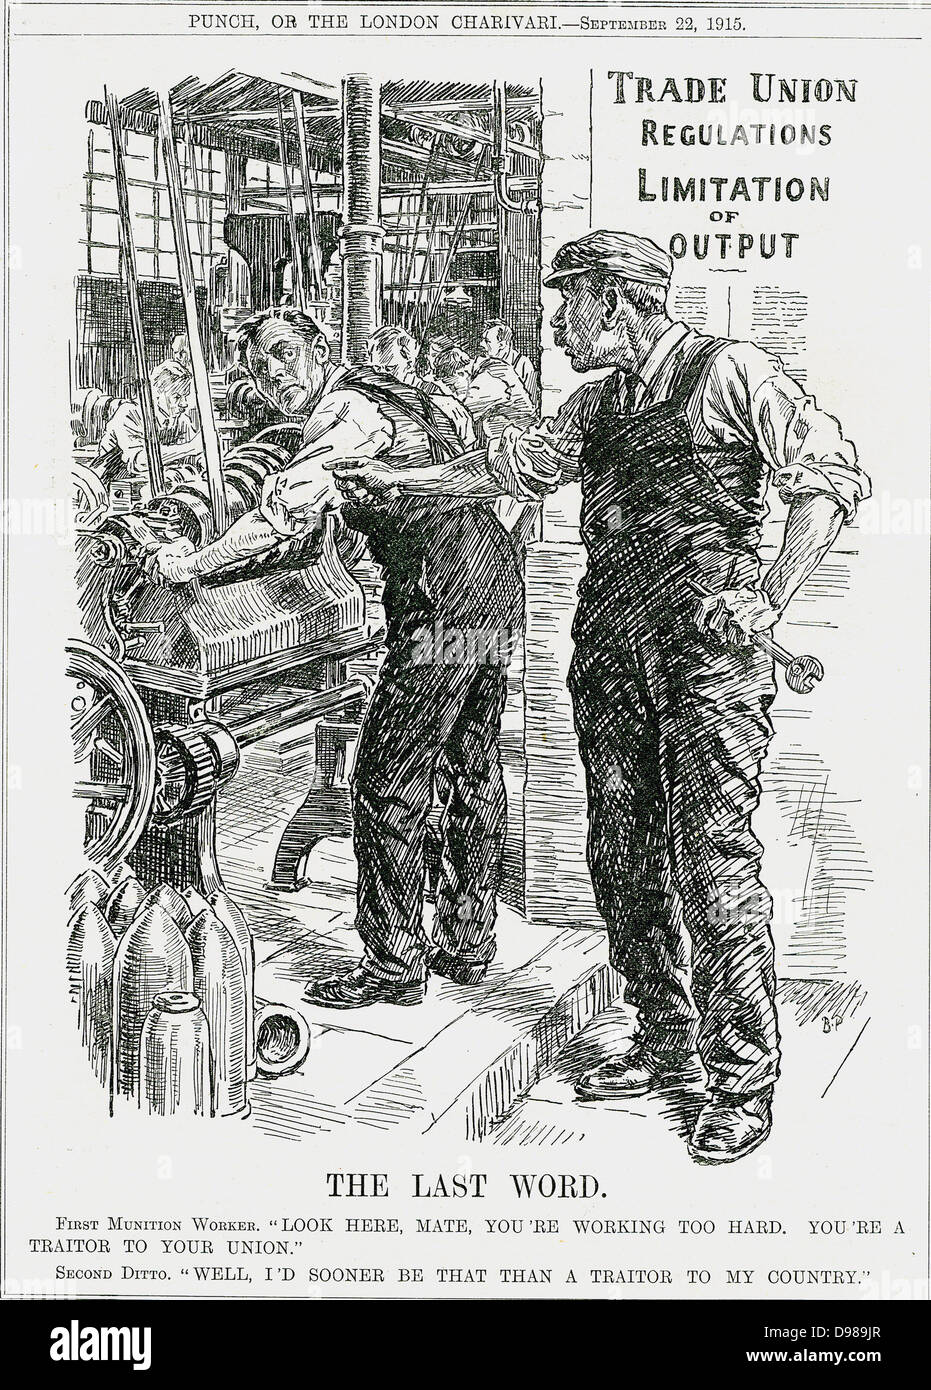 Different loyalties: Trade unionist telling fellow munitions worker he is being disloyalty to the Union by working so hard. His workmate says he'd soon be a traitor to the union than to his country. Bernard Partridge cartoon from 'Punch', London, 22 September 1915. Stock Photo